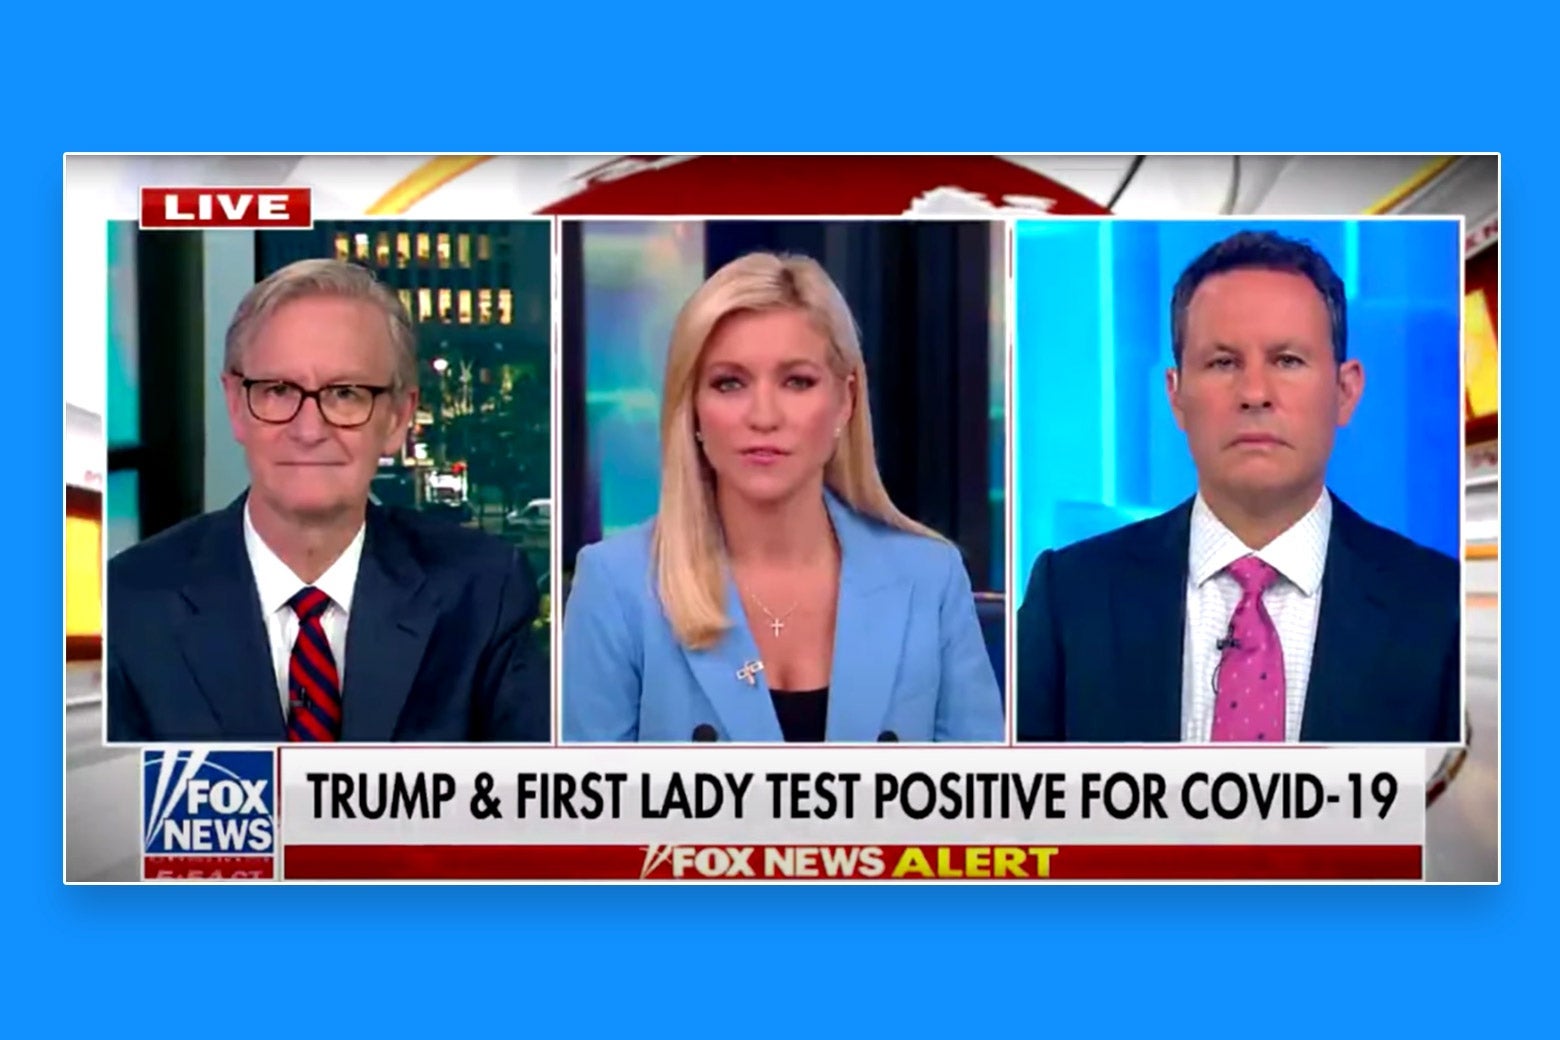 The hosts of Fox & Friends are seen. A chyron below reads: "Trump & First Lady Test Positive for COVID-19."